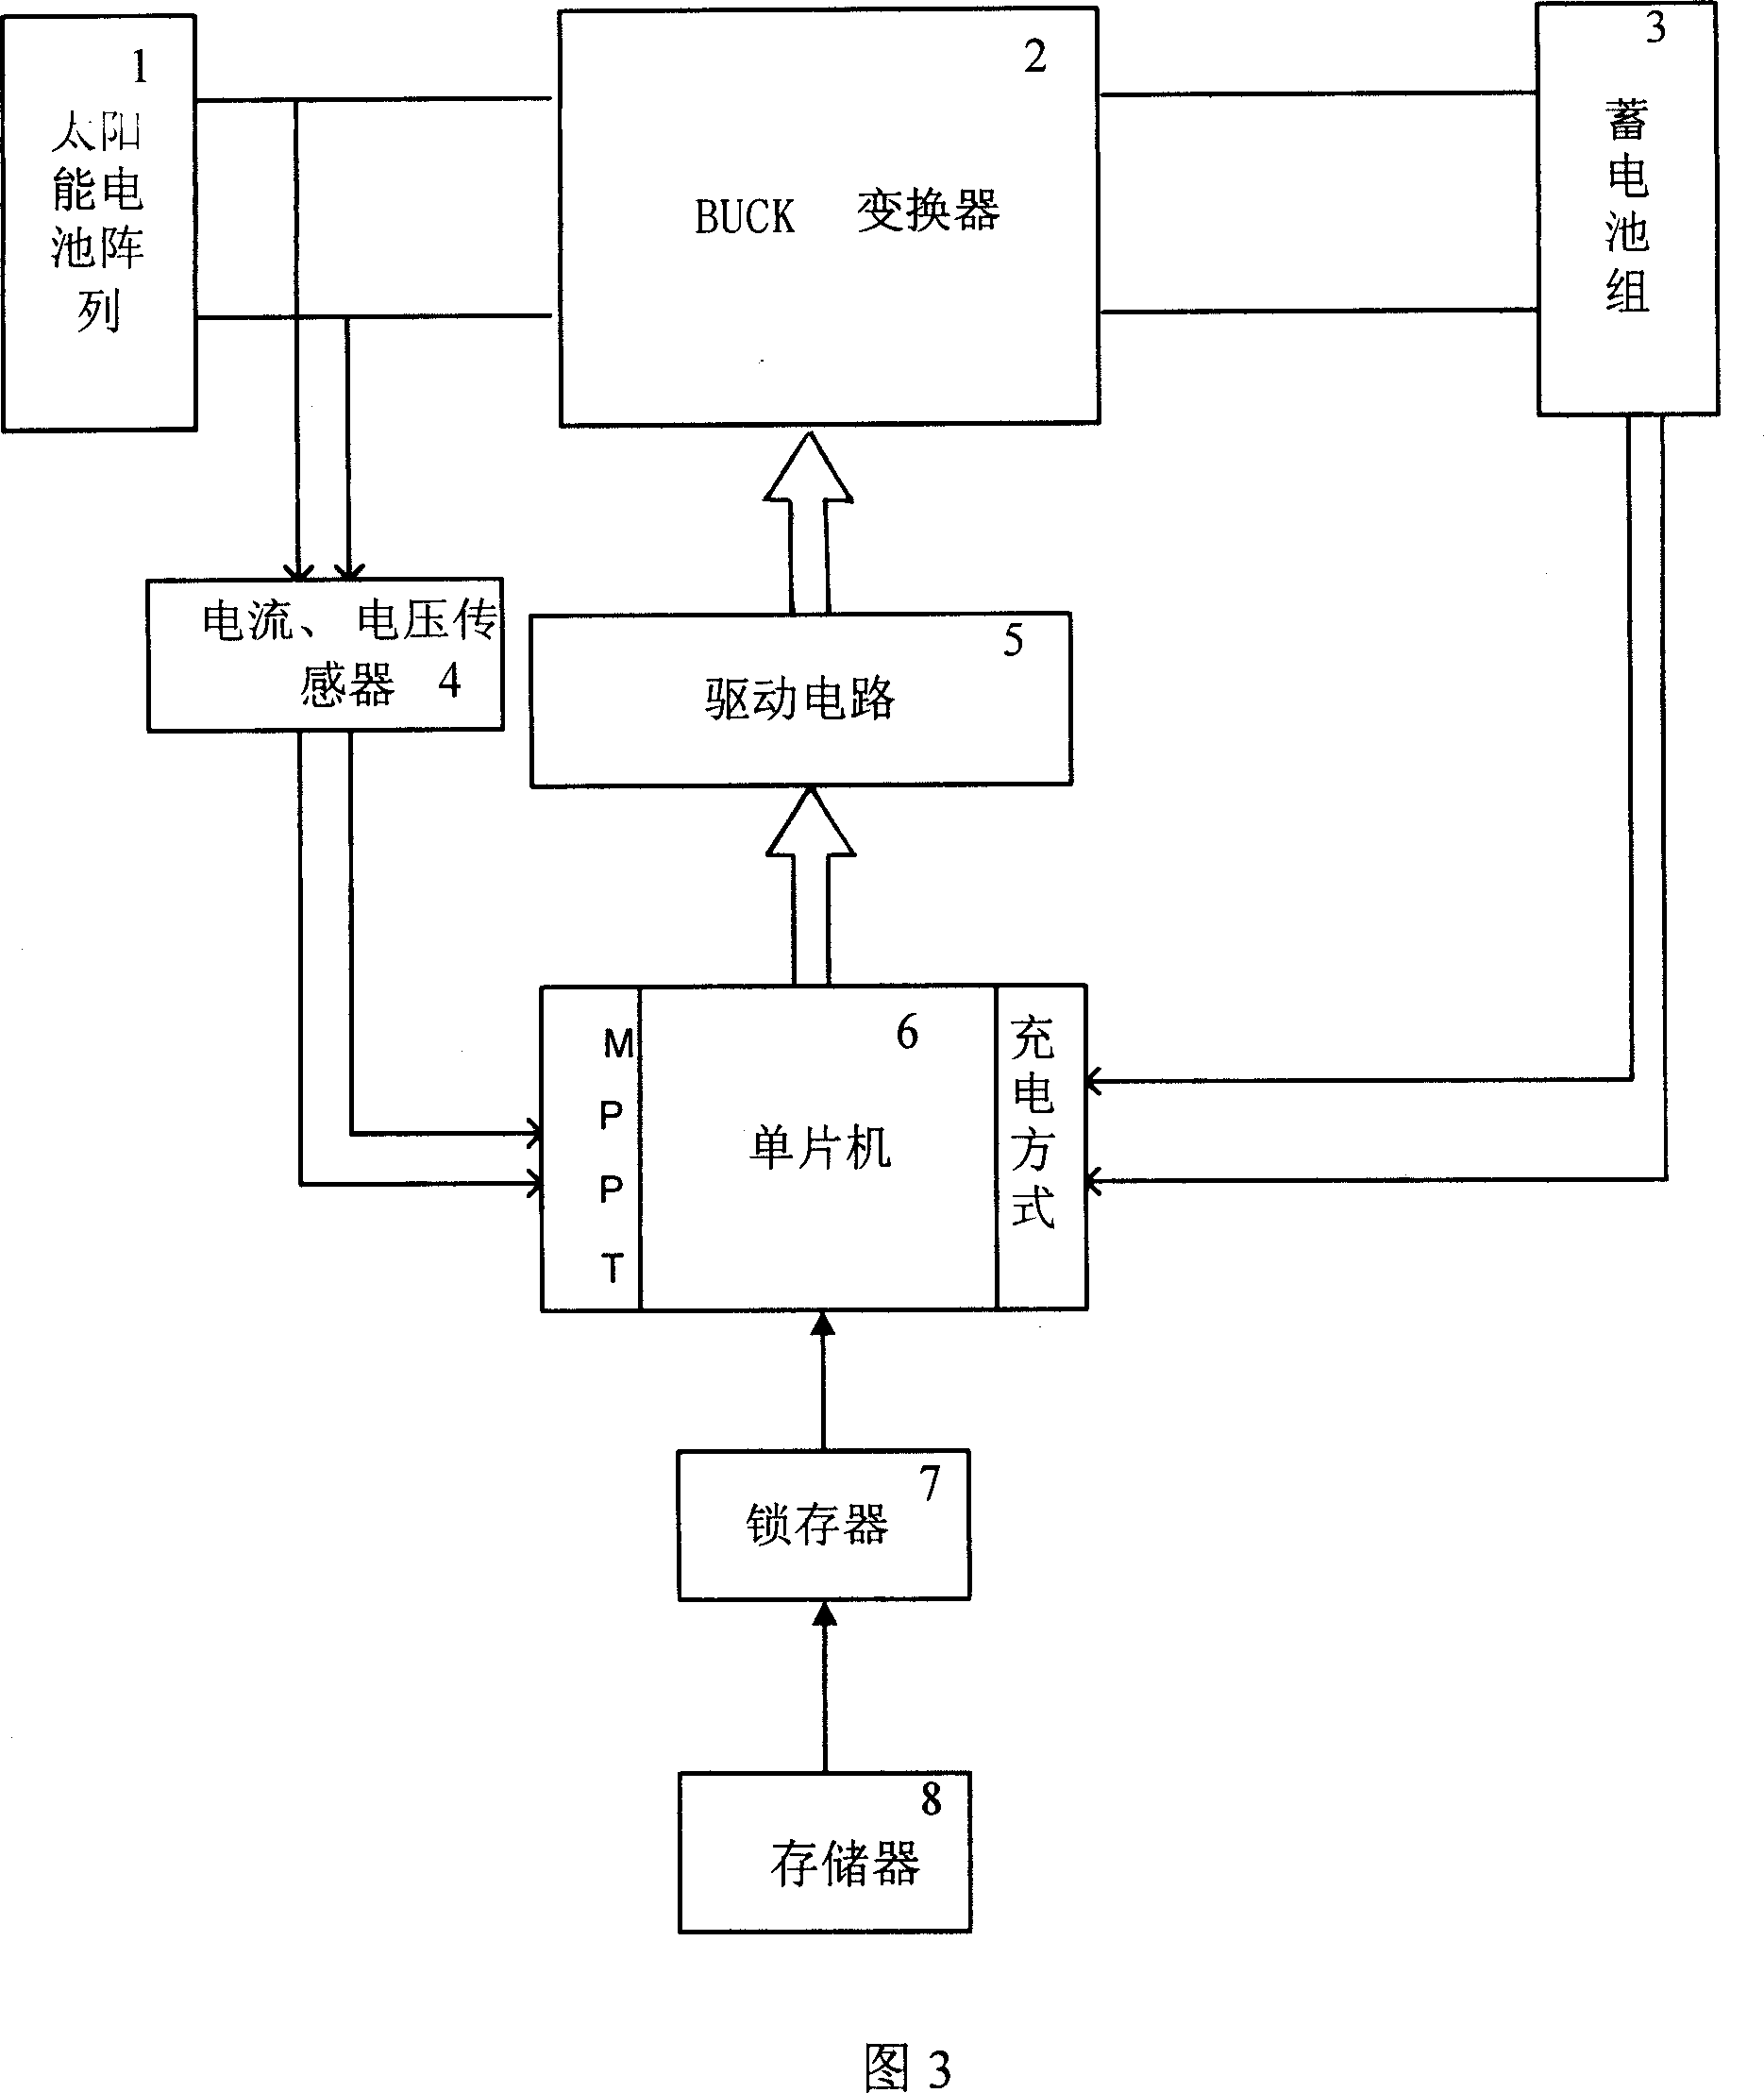 Maximum power tracking capture photovoltaic control method with self-adaptive search algorithm